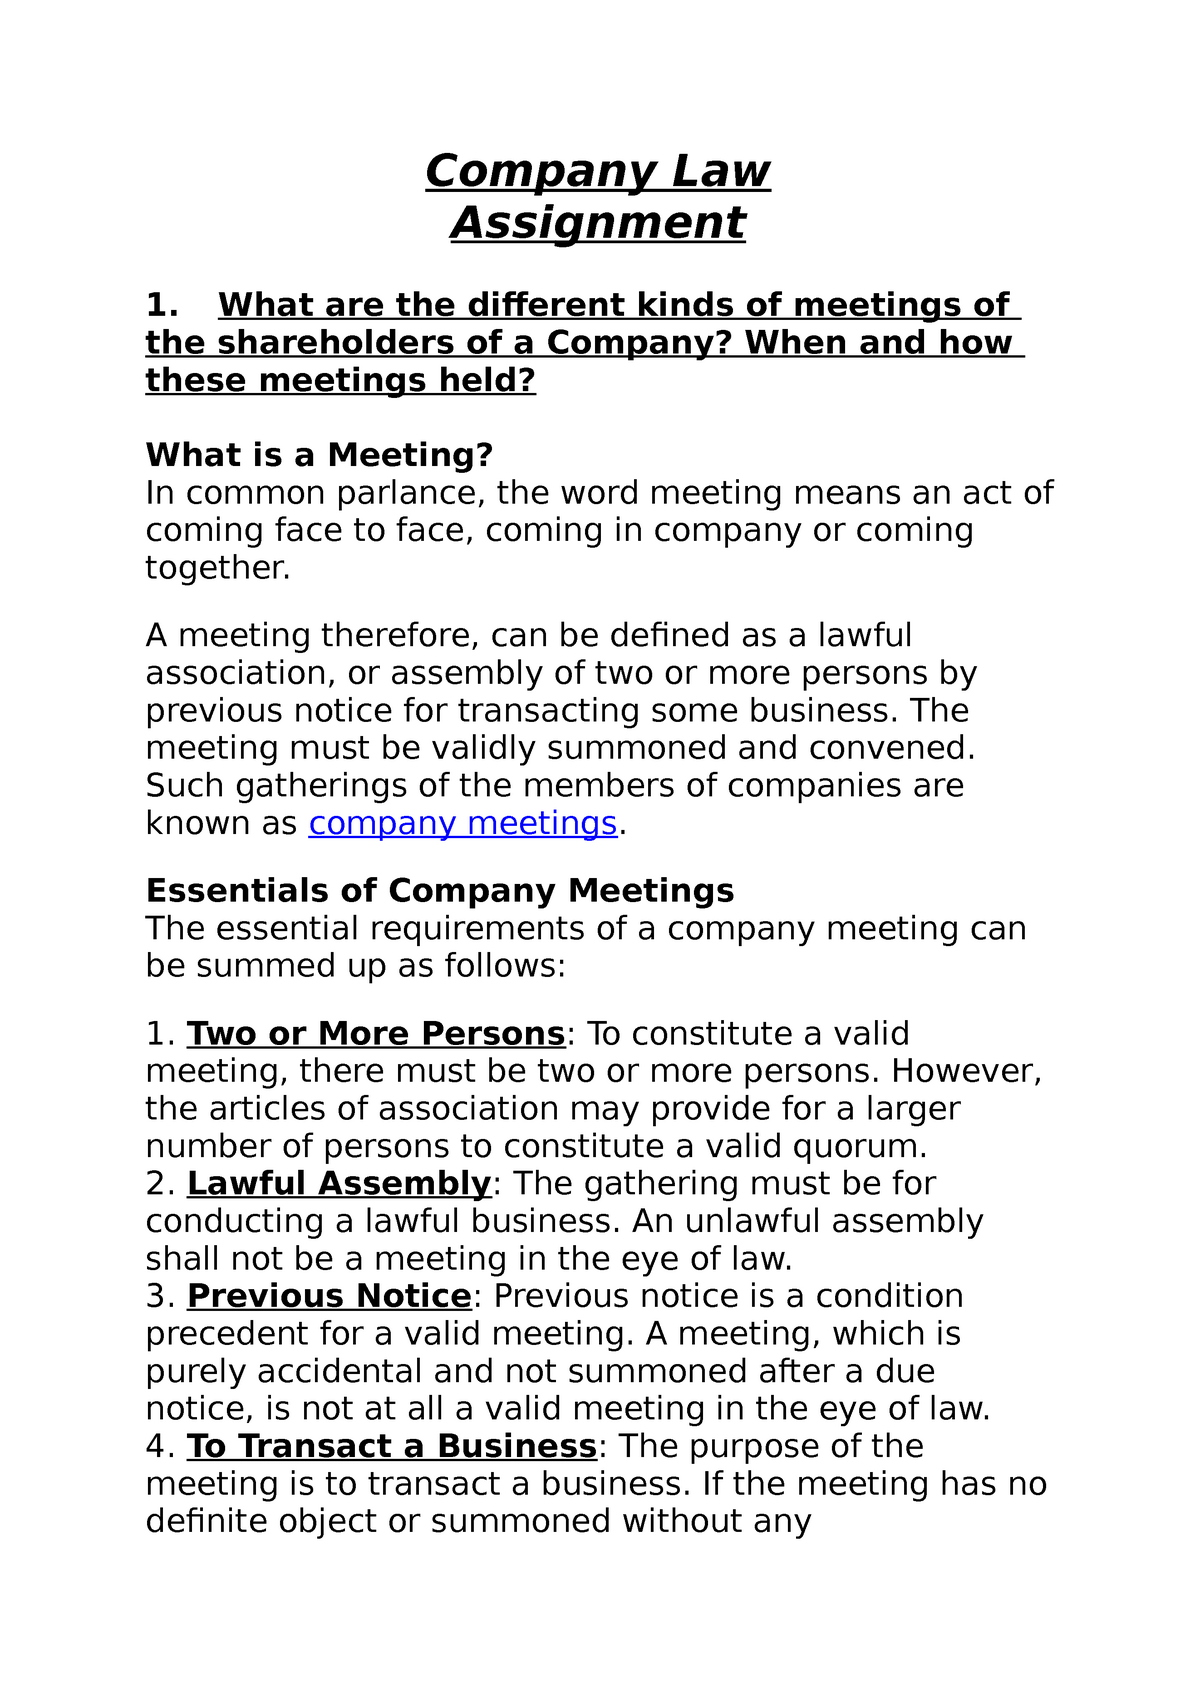 types of meeting in company law